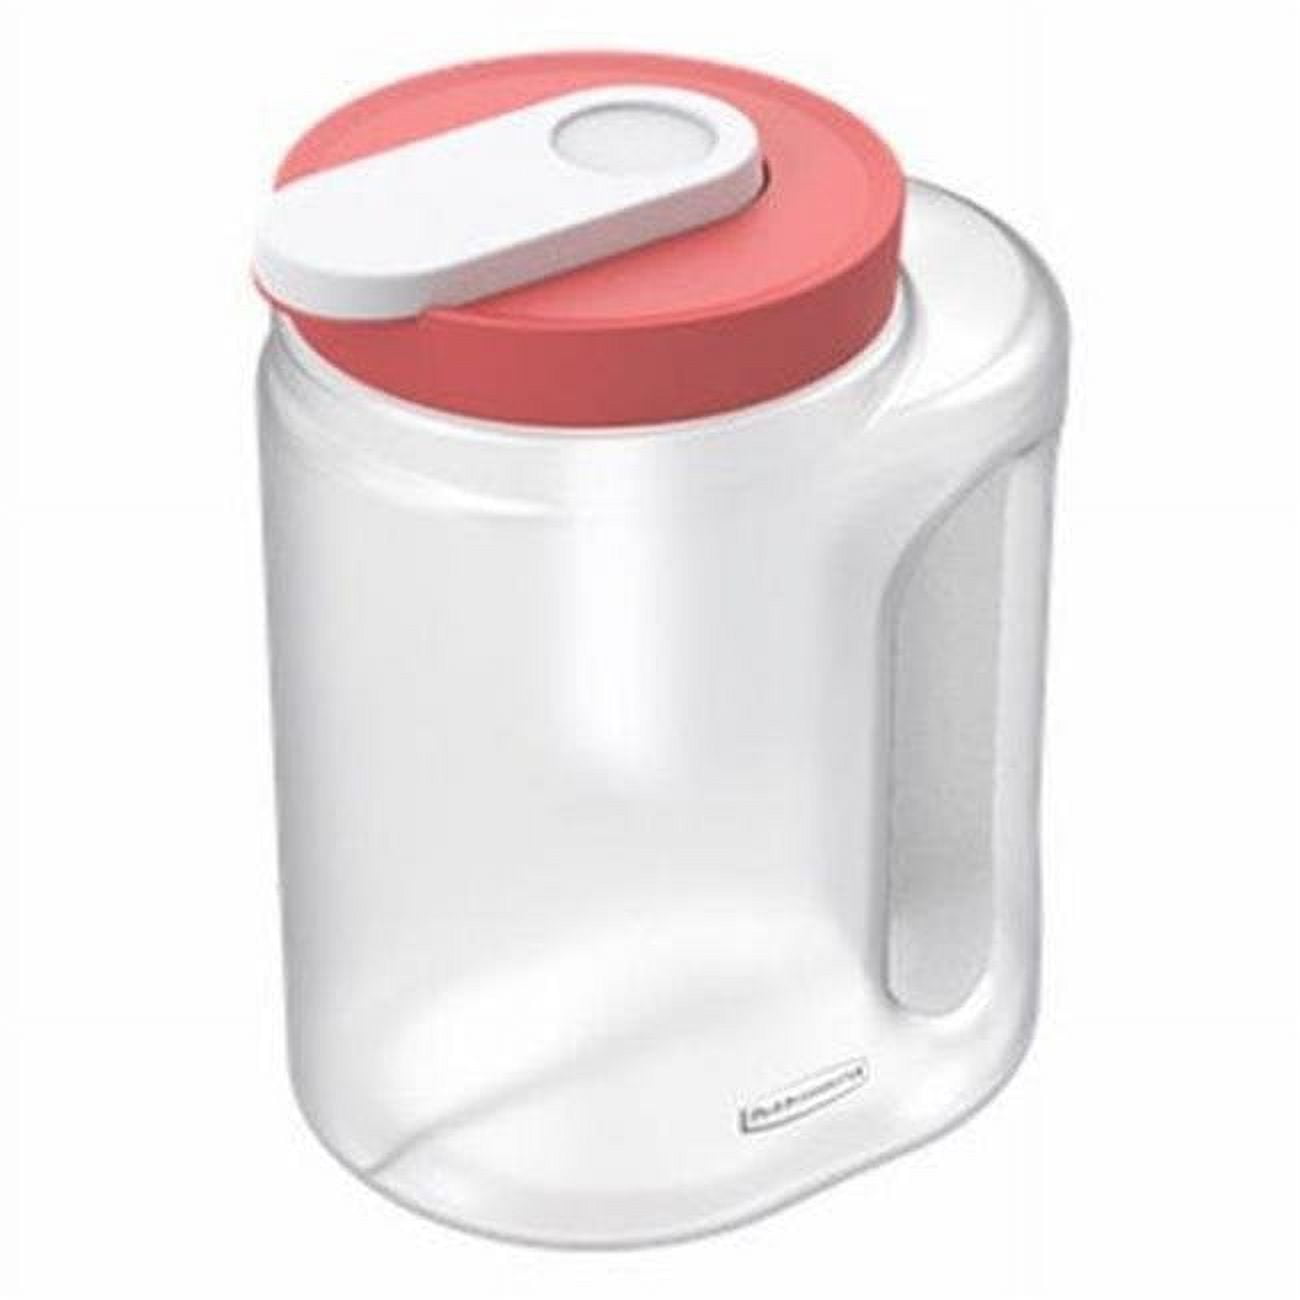 Save on Rubbermaid Compact Pitcher 2 Quart Order Online Delivery